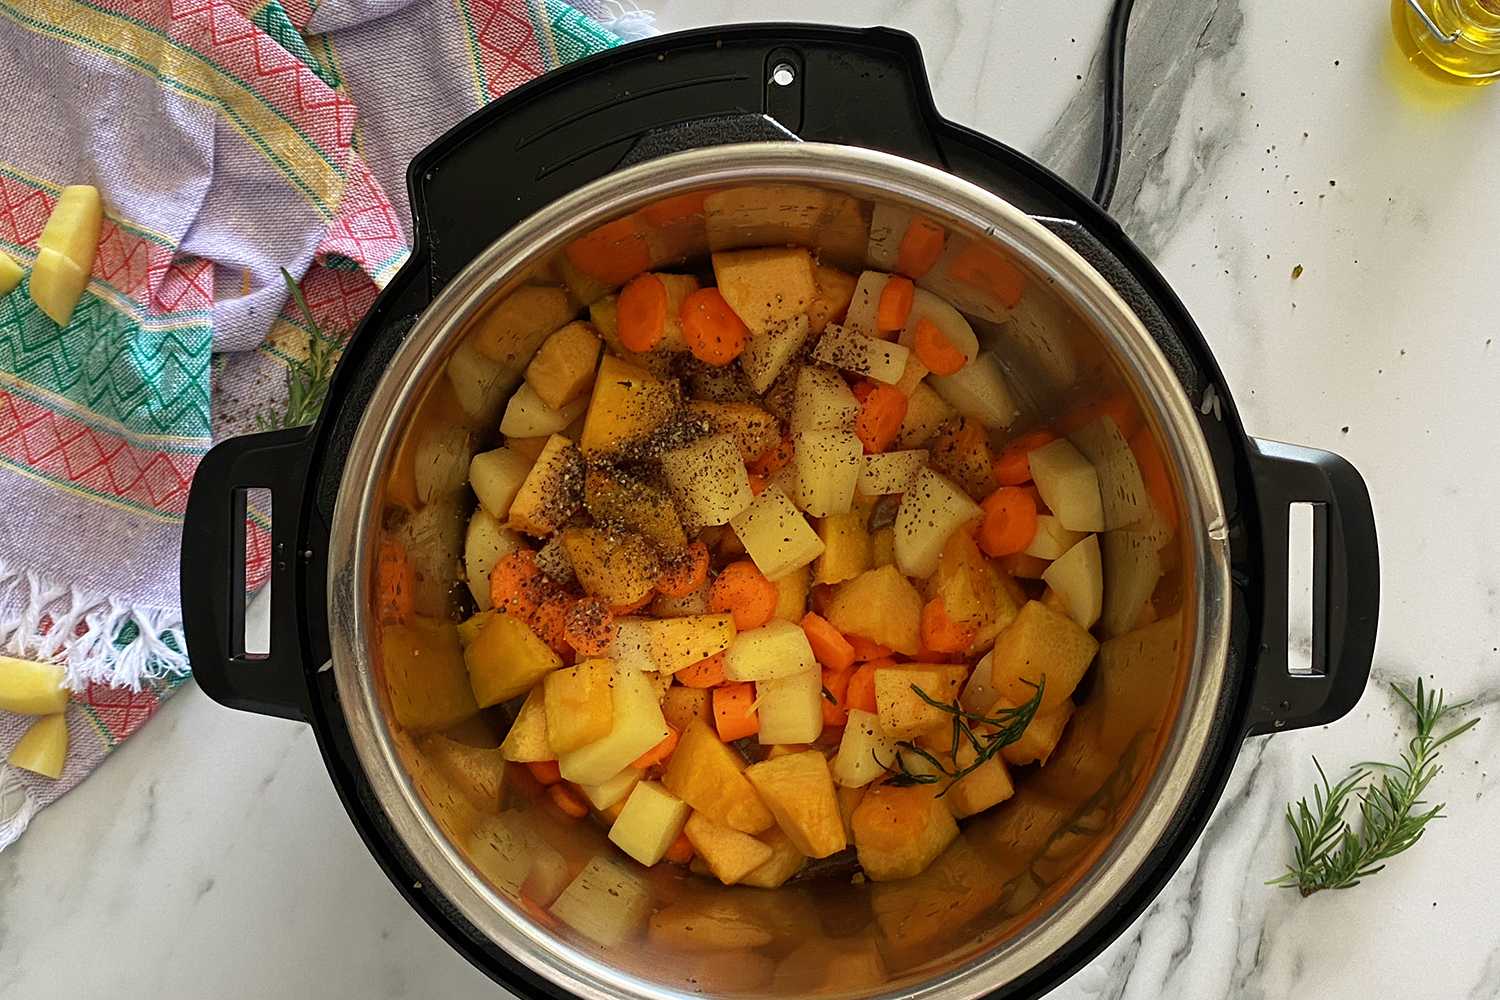 How To Steam Vegetables In An Electric Pressure Cooker